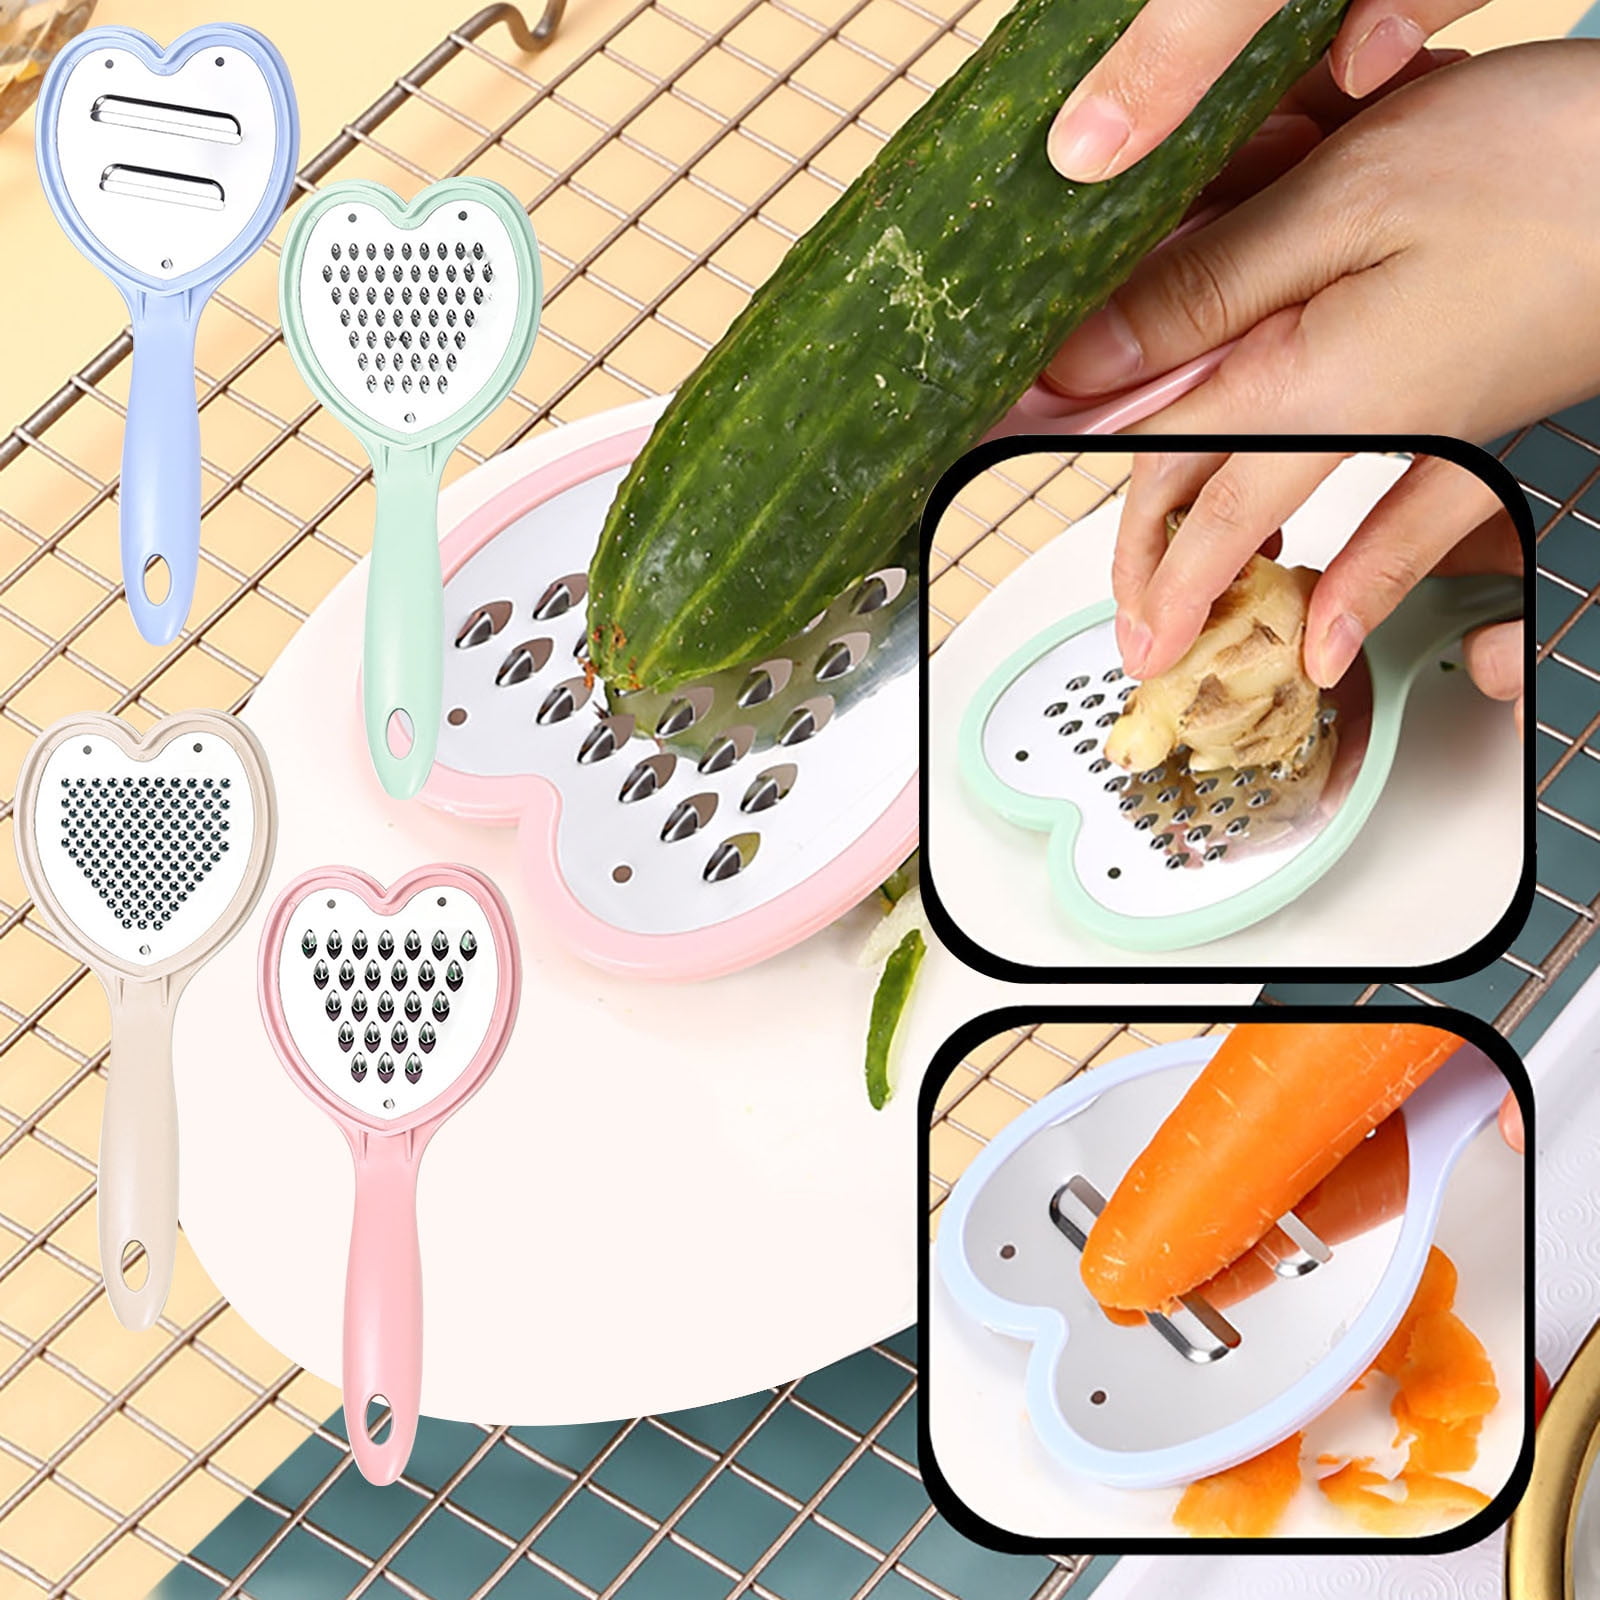 Pjtewawe Shaver Multi Purpose Vegetable Cutter 4 Piece Set Stainless Steel Cheese Grater and Vegetable Shredder Can Be used for Vegetables Fruit